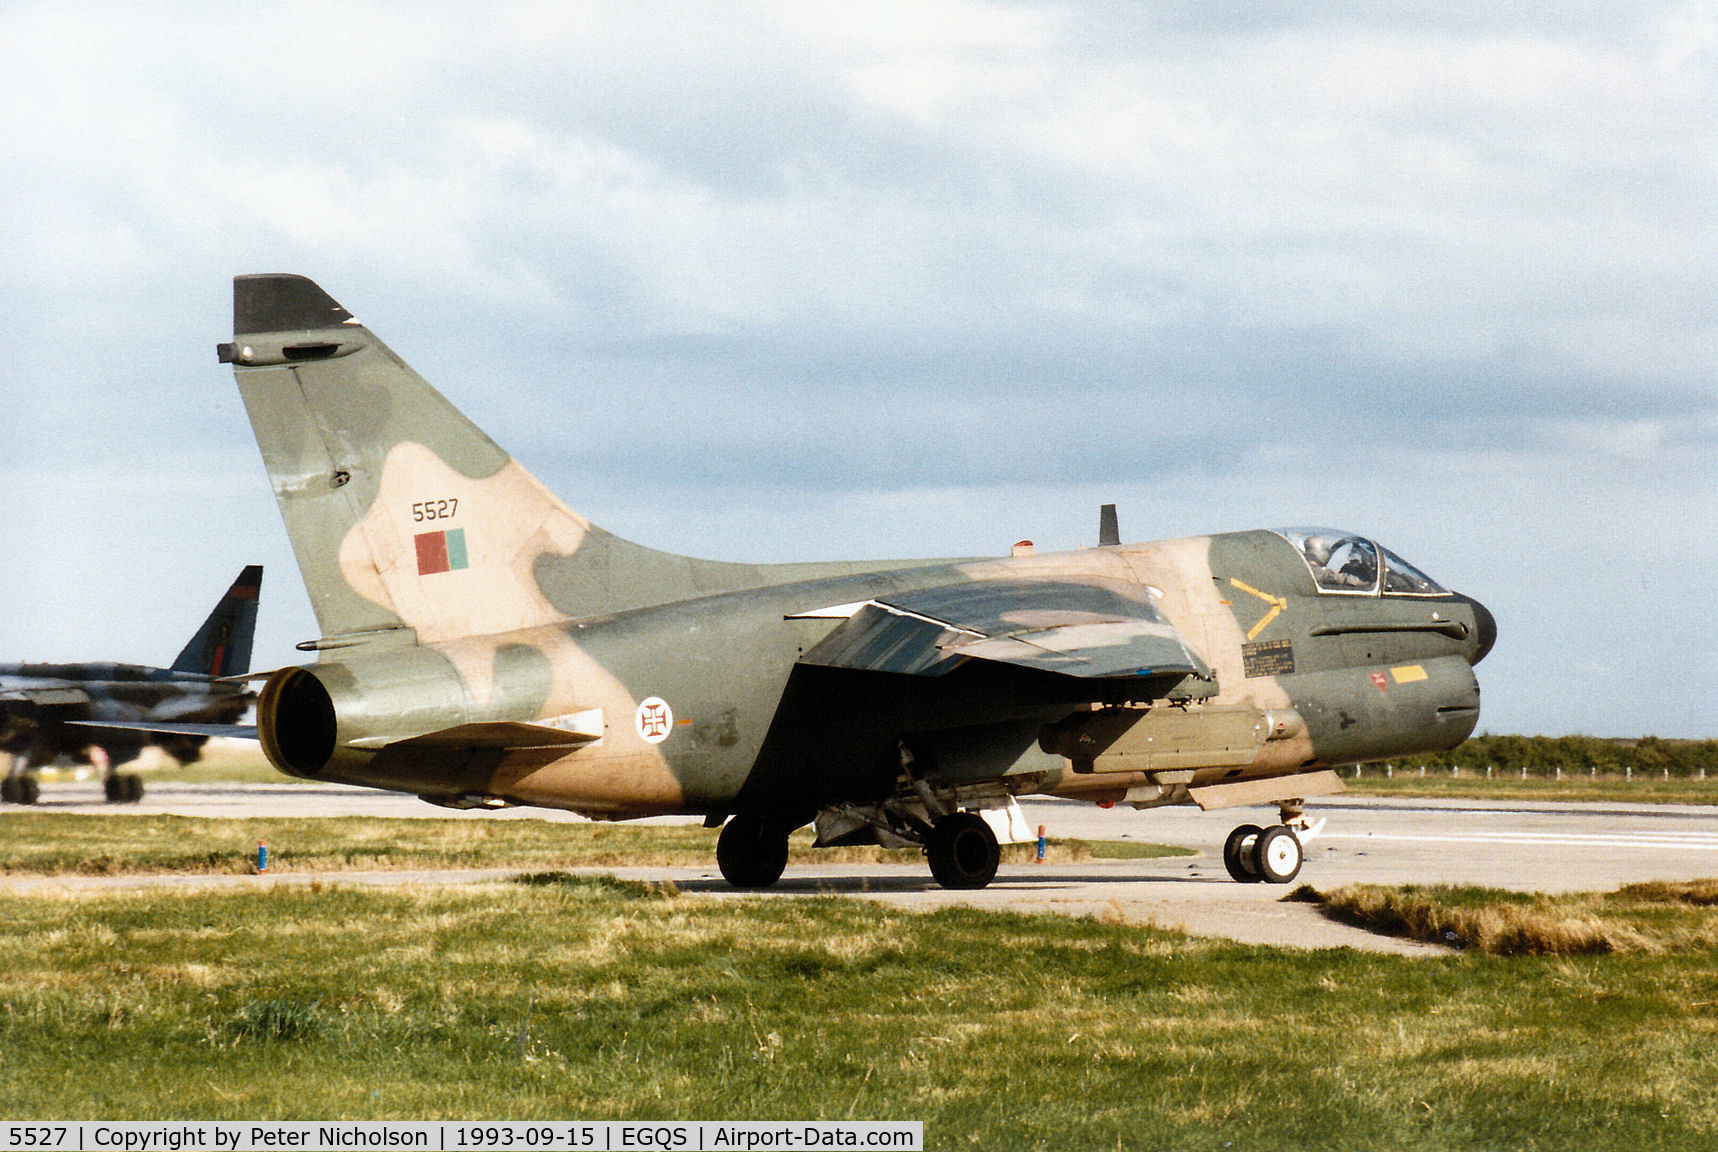 5527, LTV A-7P Corsair II C/N A-088, Portuguese Air Force A-7P Corsair II of 304 Esquadron taxying to Runway 05 at RAF Lossiemouth in September 1993.